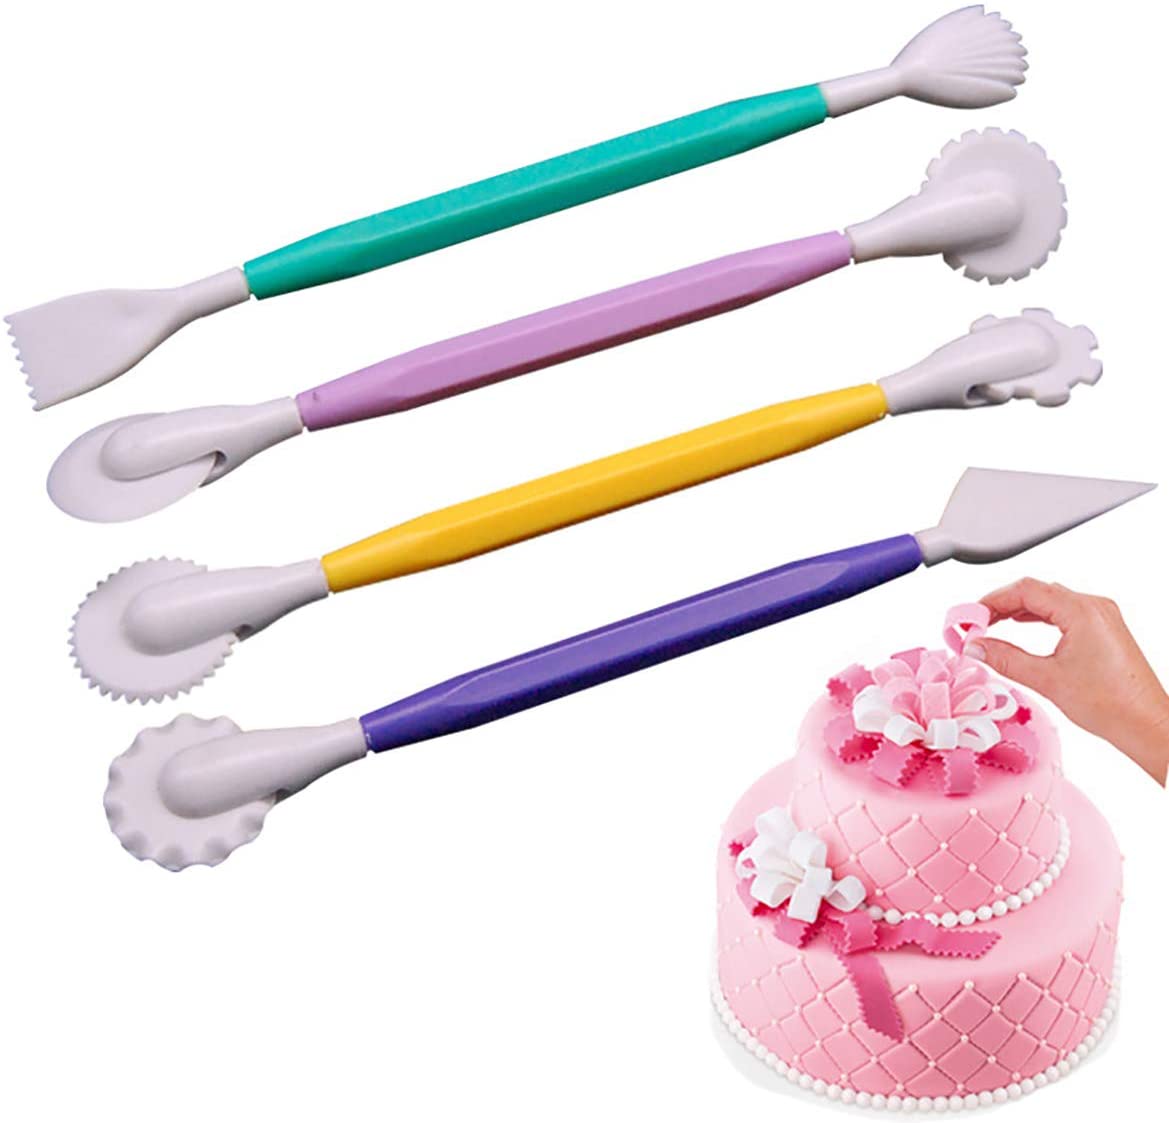 4pcs Pottery Carving Set With Soft Clay Modeling Tools, Cake Decorative  Sculpting Pens